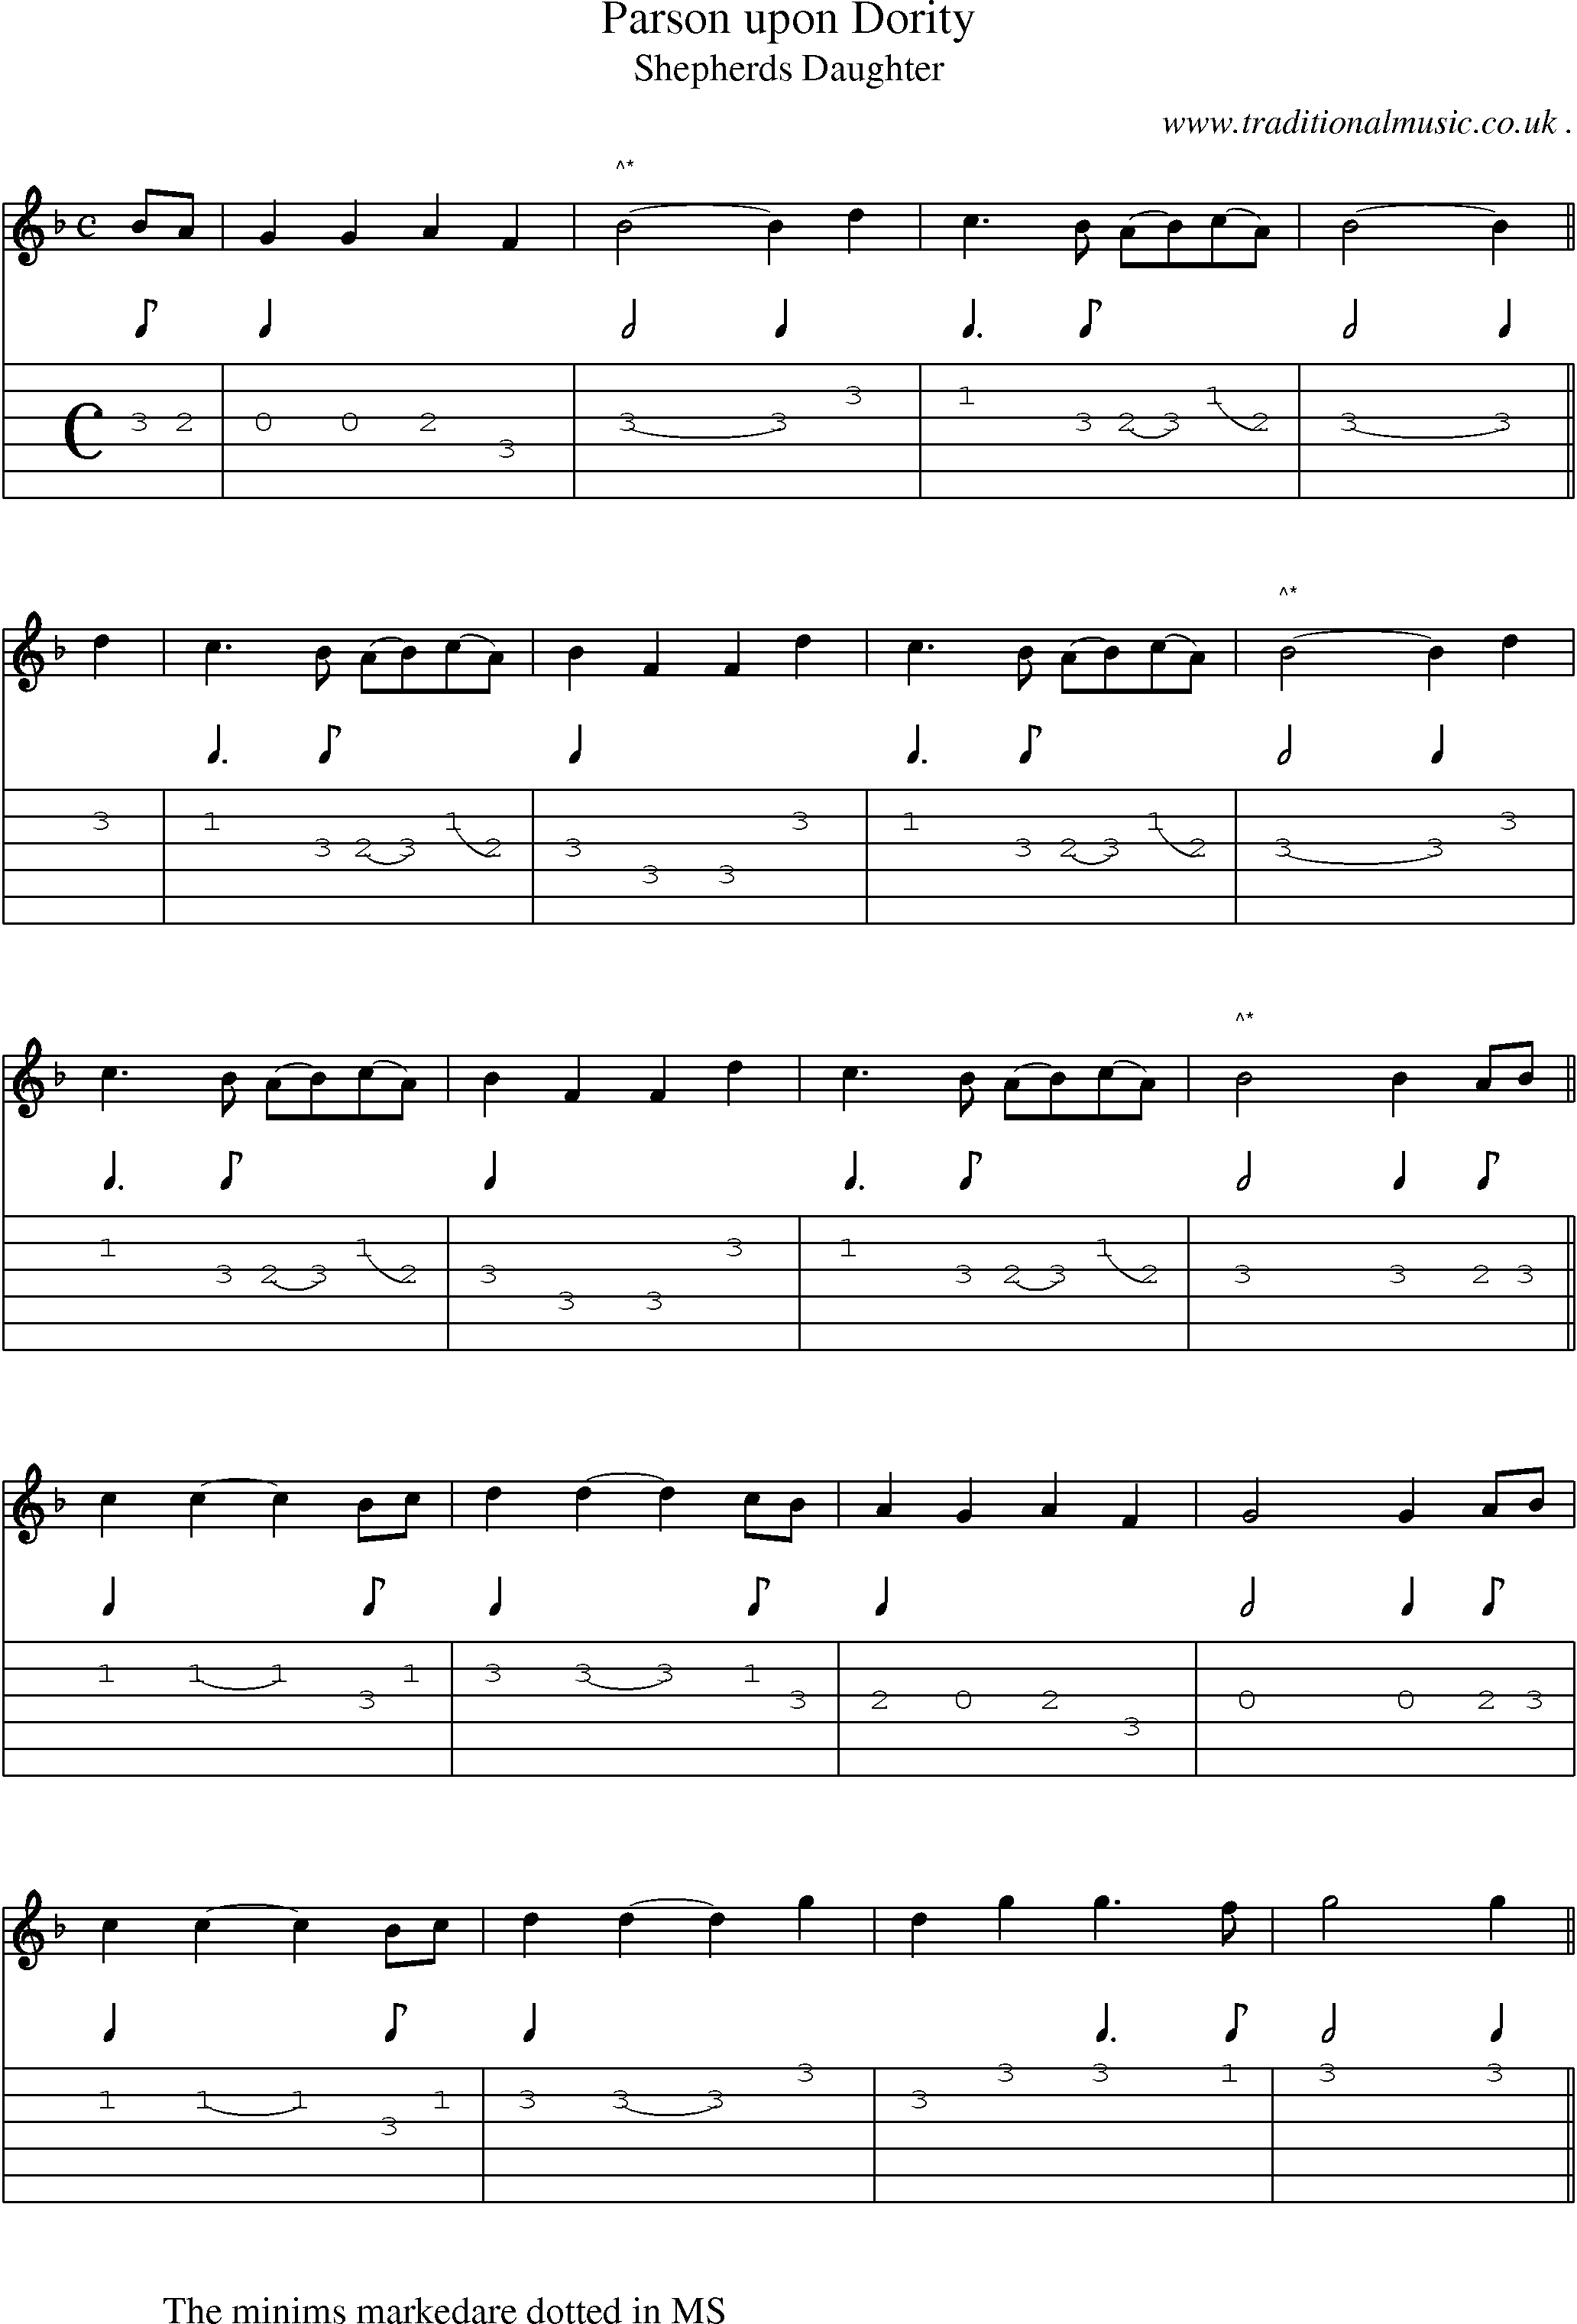 Sheet-Music and Guitar Tabs for Parson Upon Dority